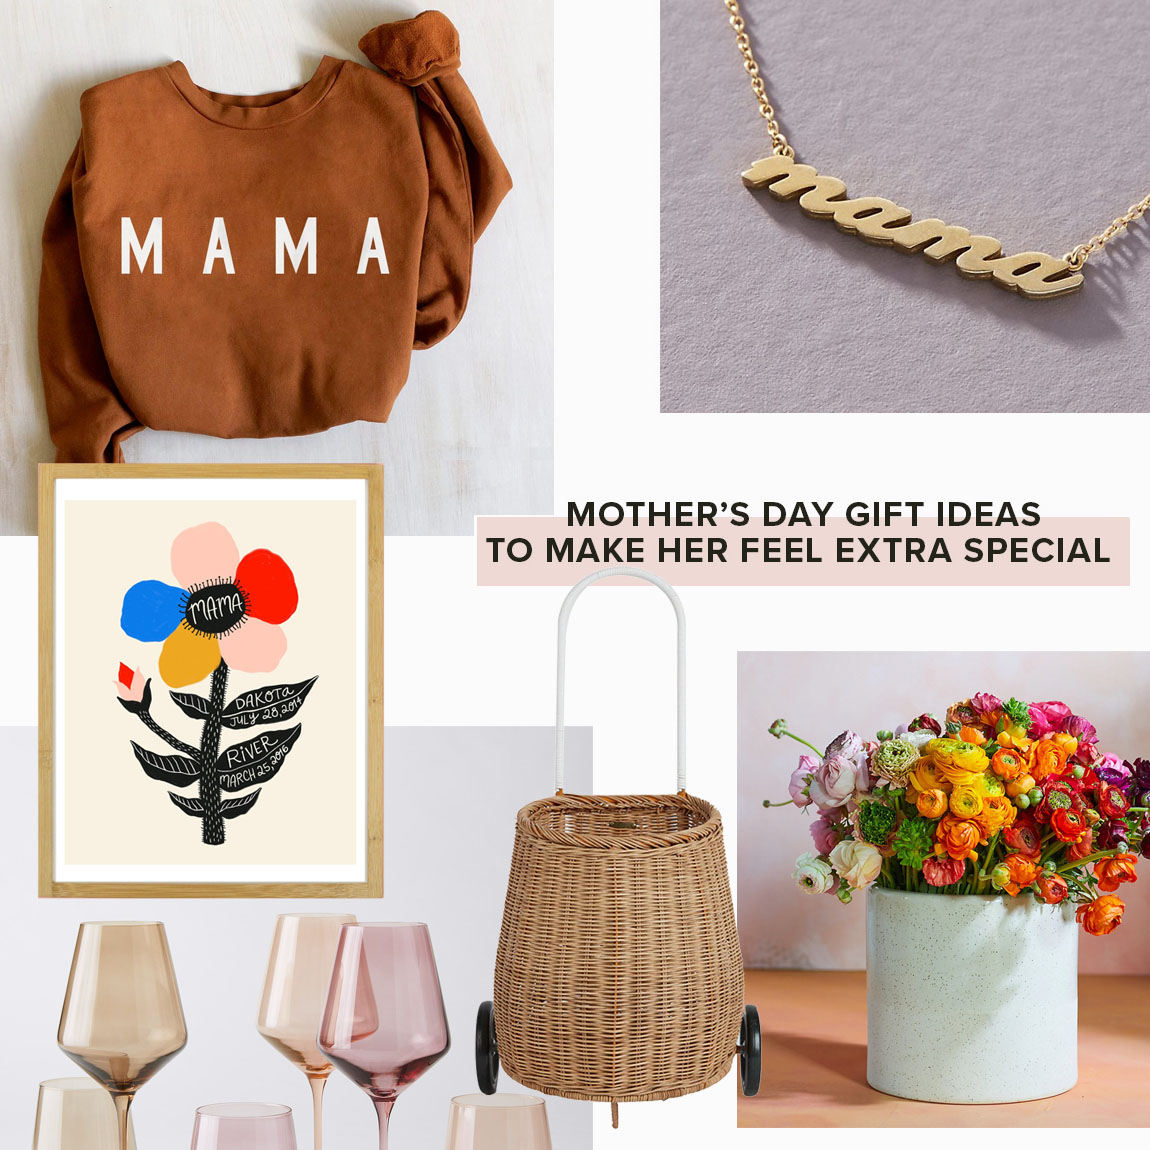 12 Chic, Unique & Practical Gifts For YOUR Mom - The Mom Edit